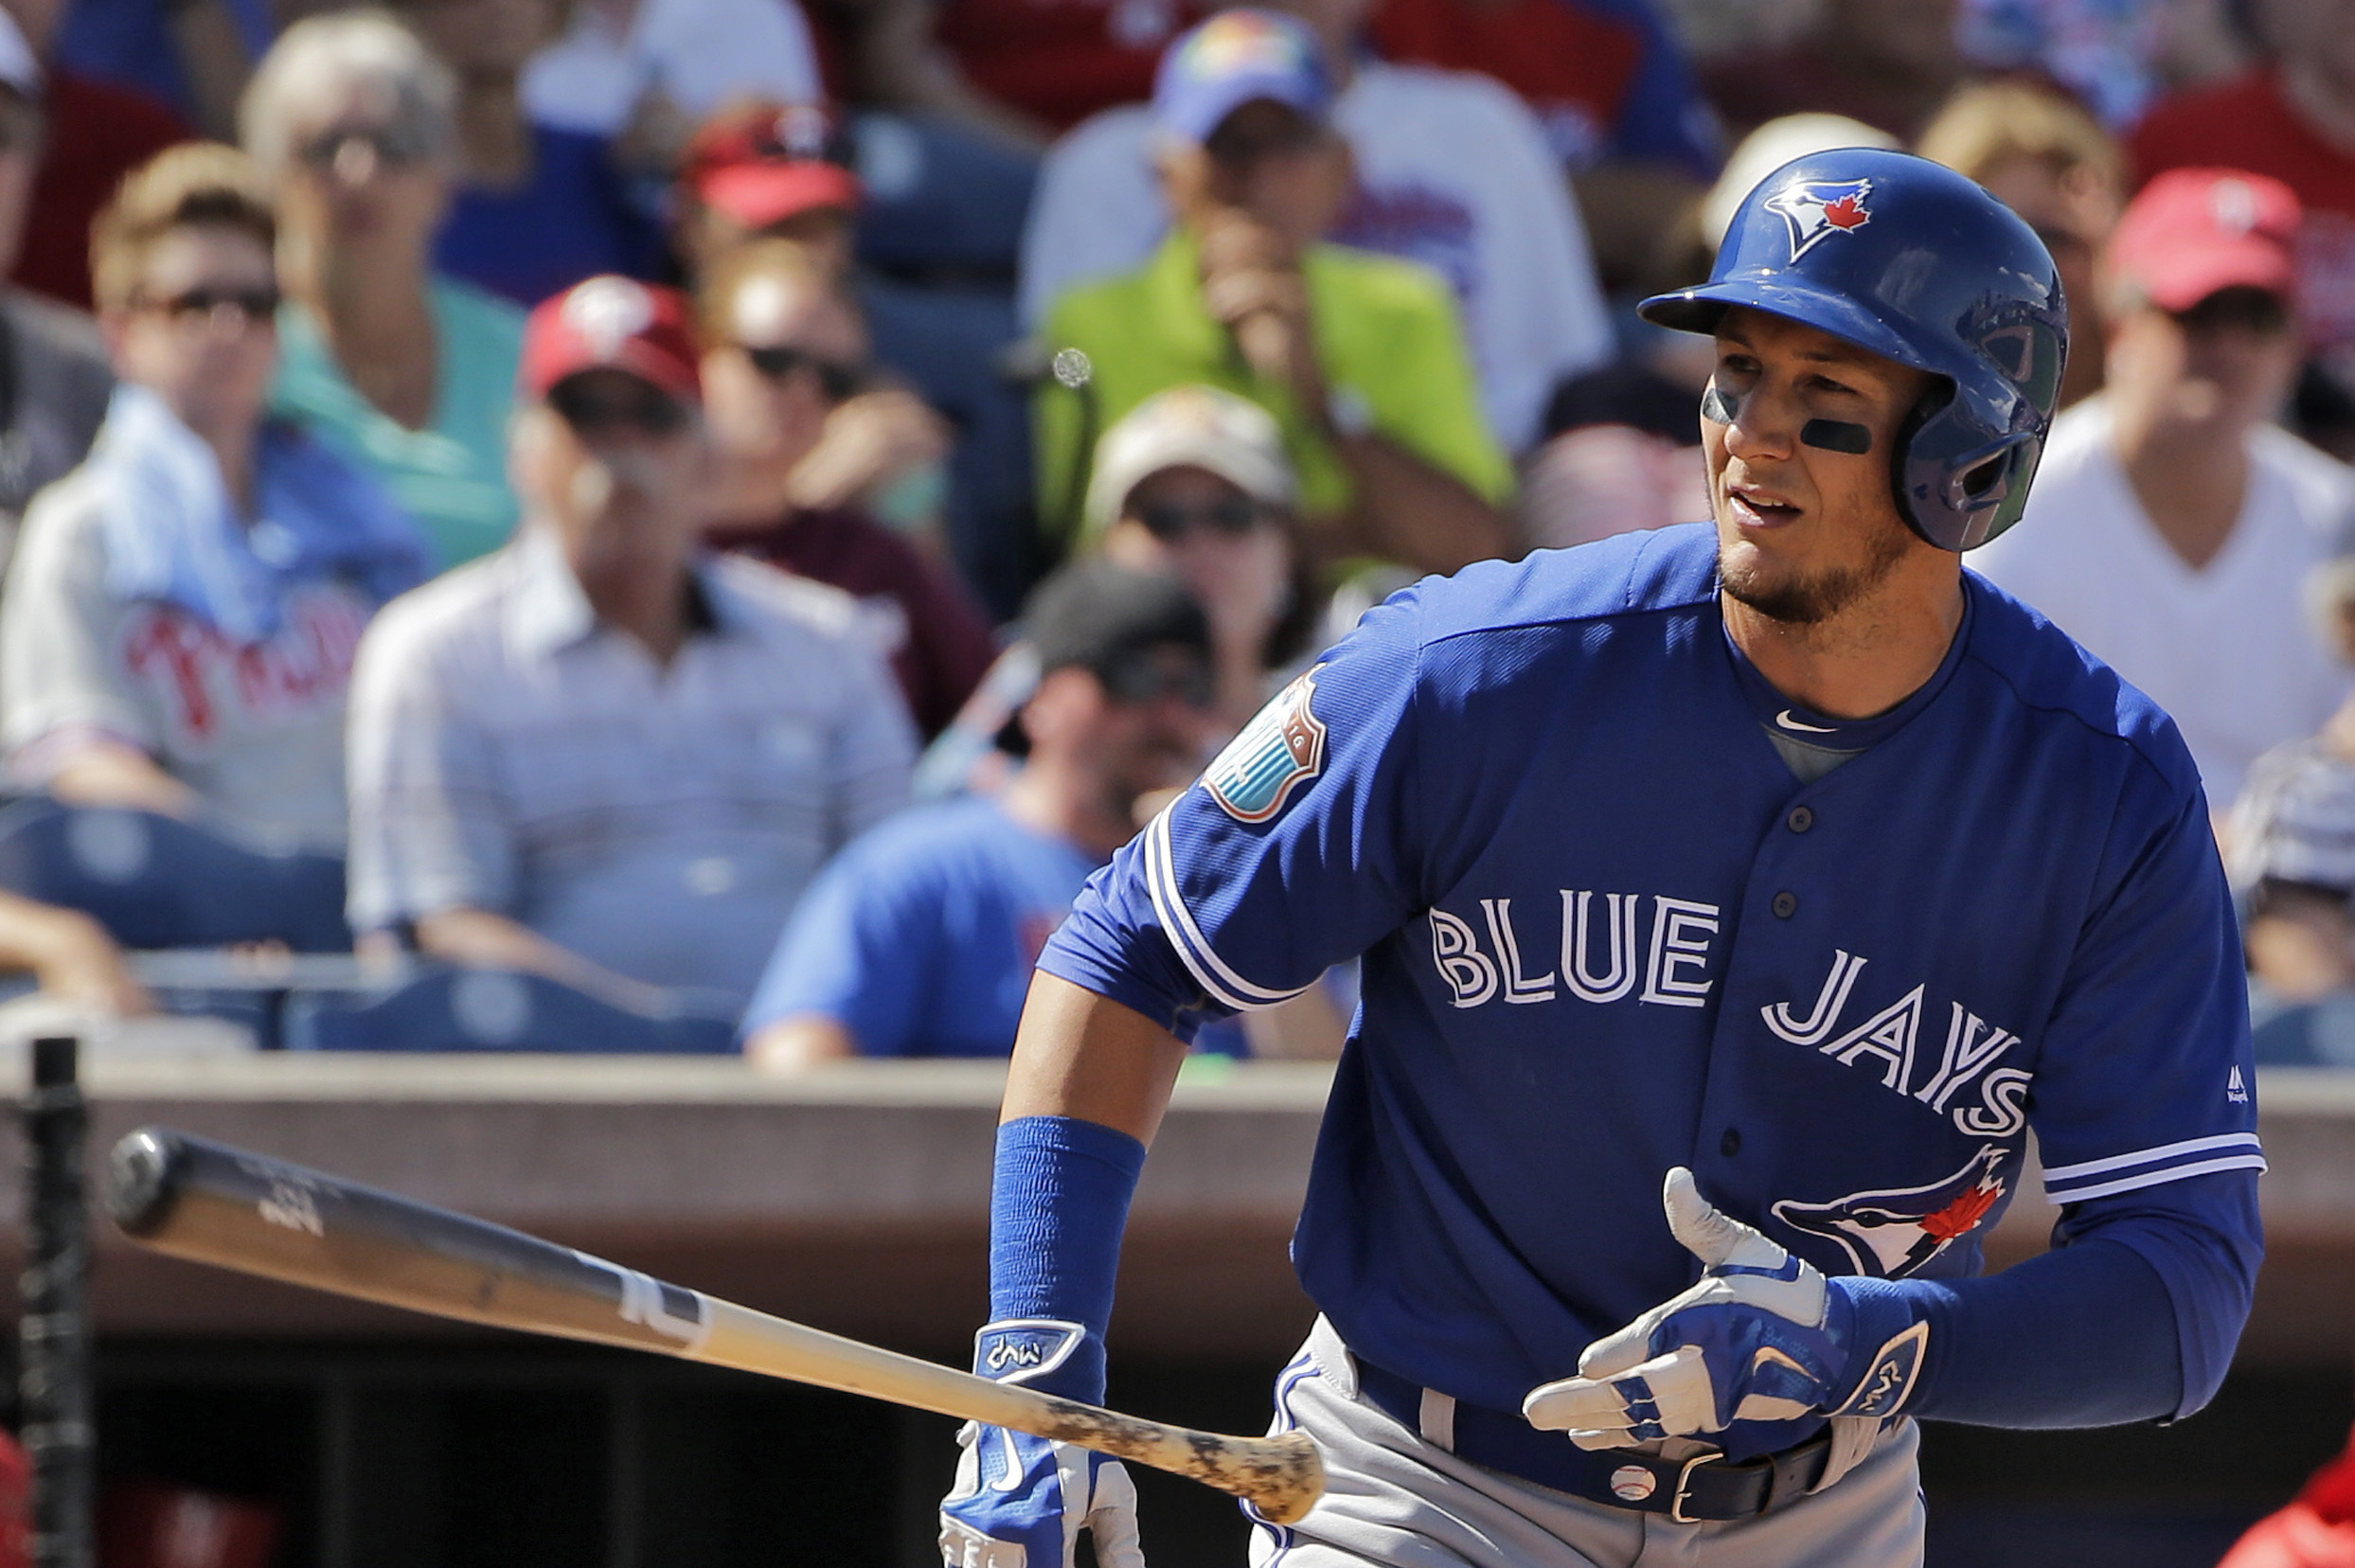 Blue Jays players who will be most impacted by the insanity of Coors Field